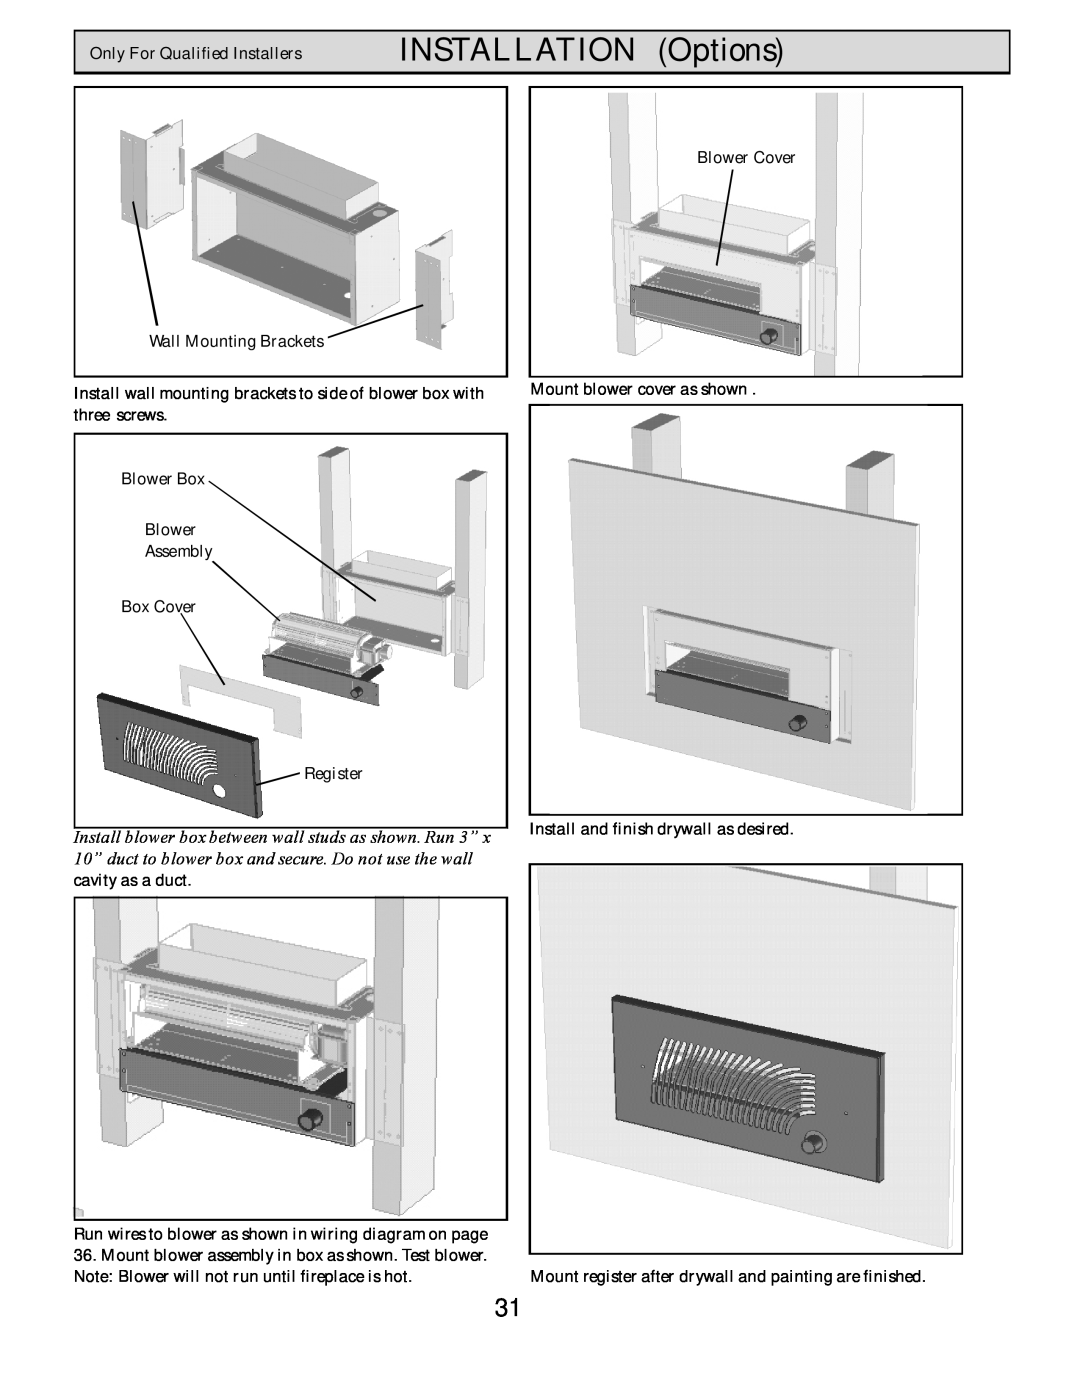 Harman Stove Company HB 38 DV manual INSTALLATION Options, Only For Qualified Installers 